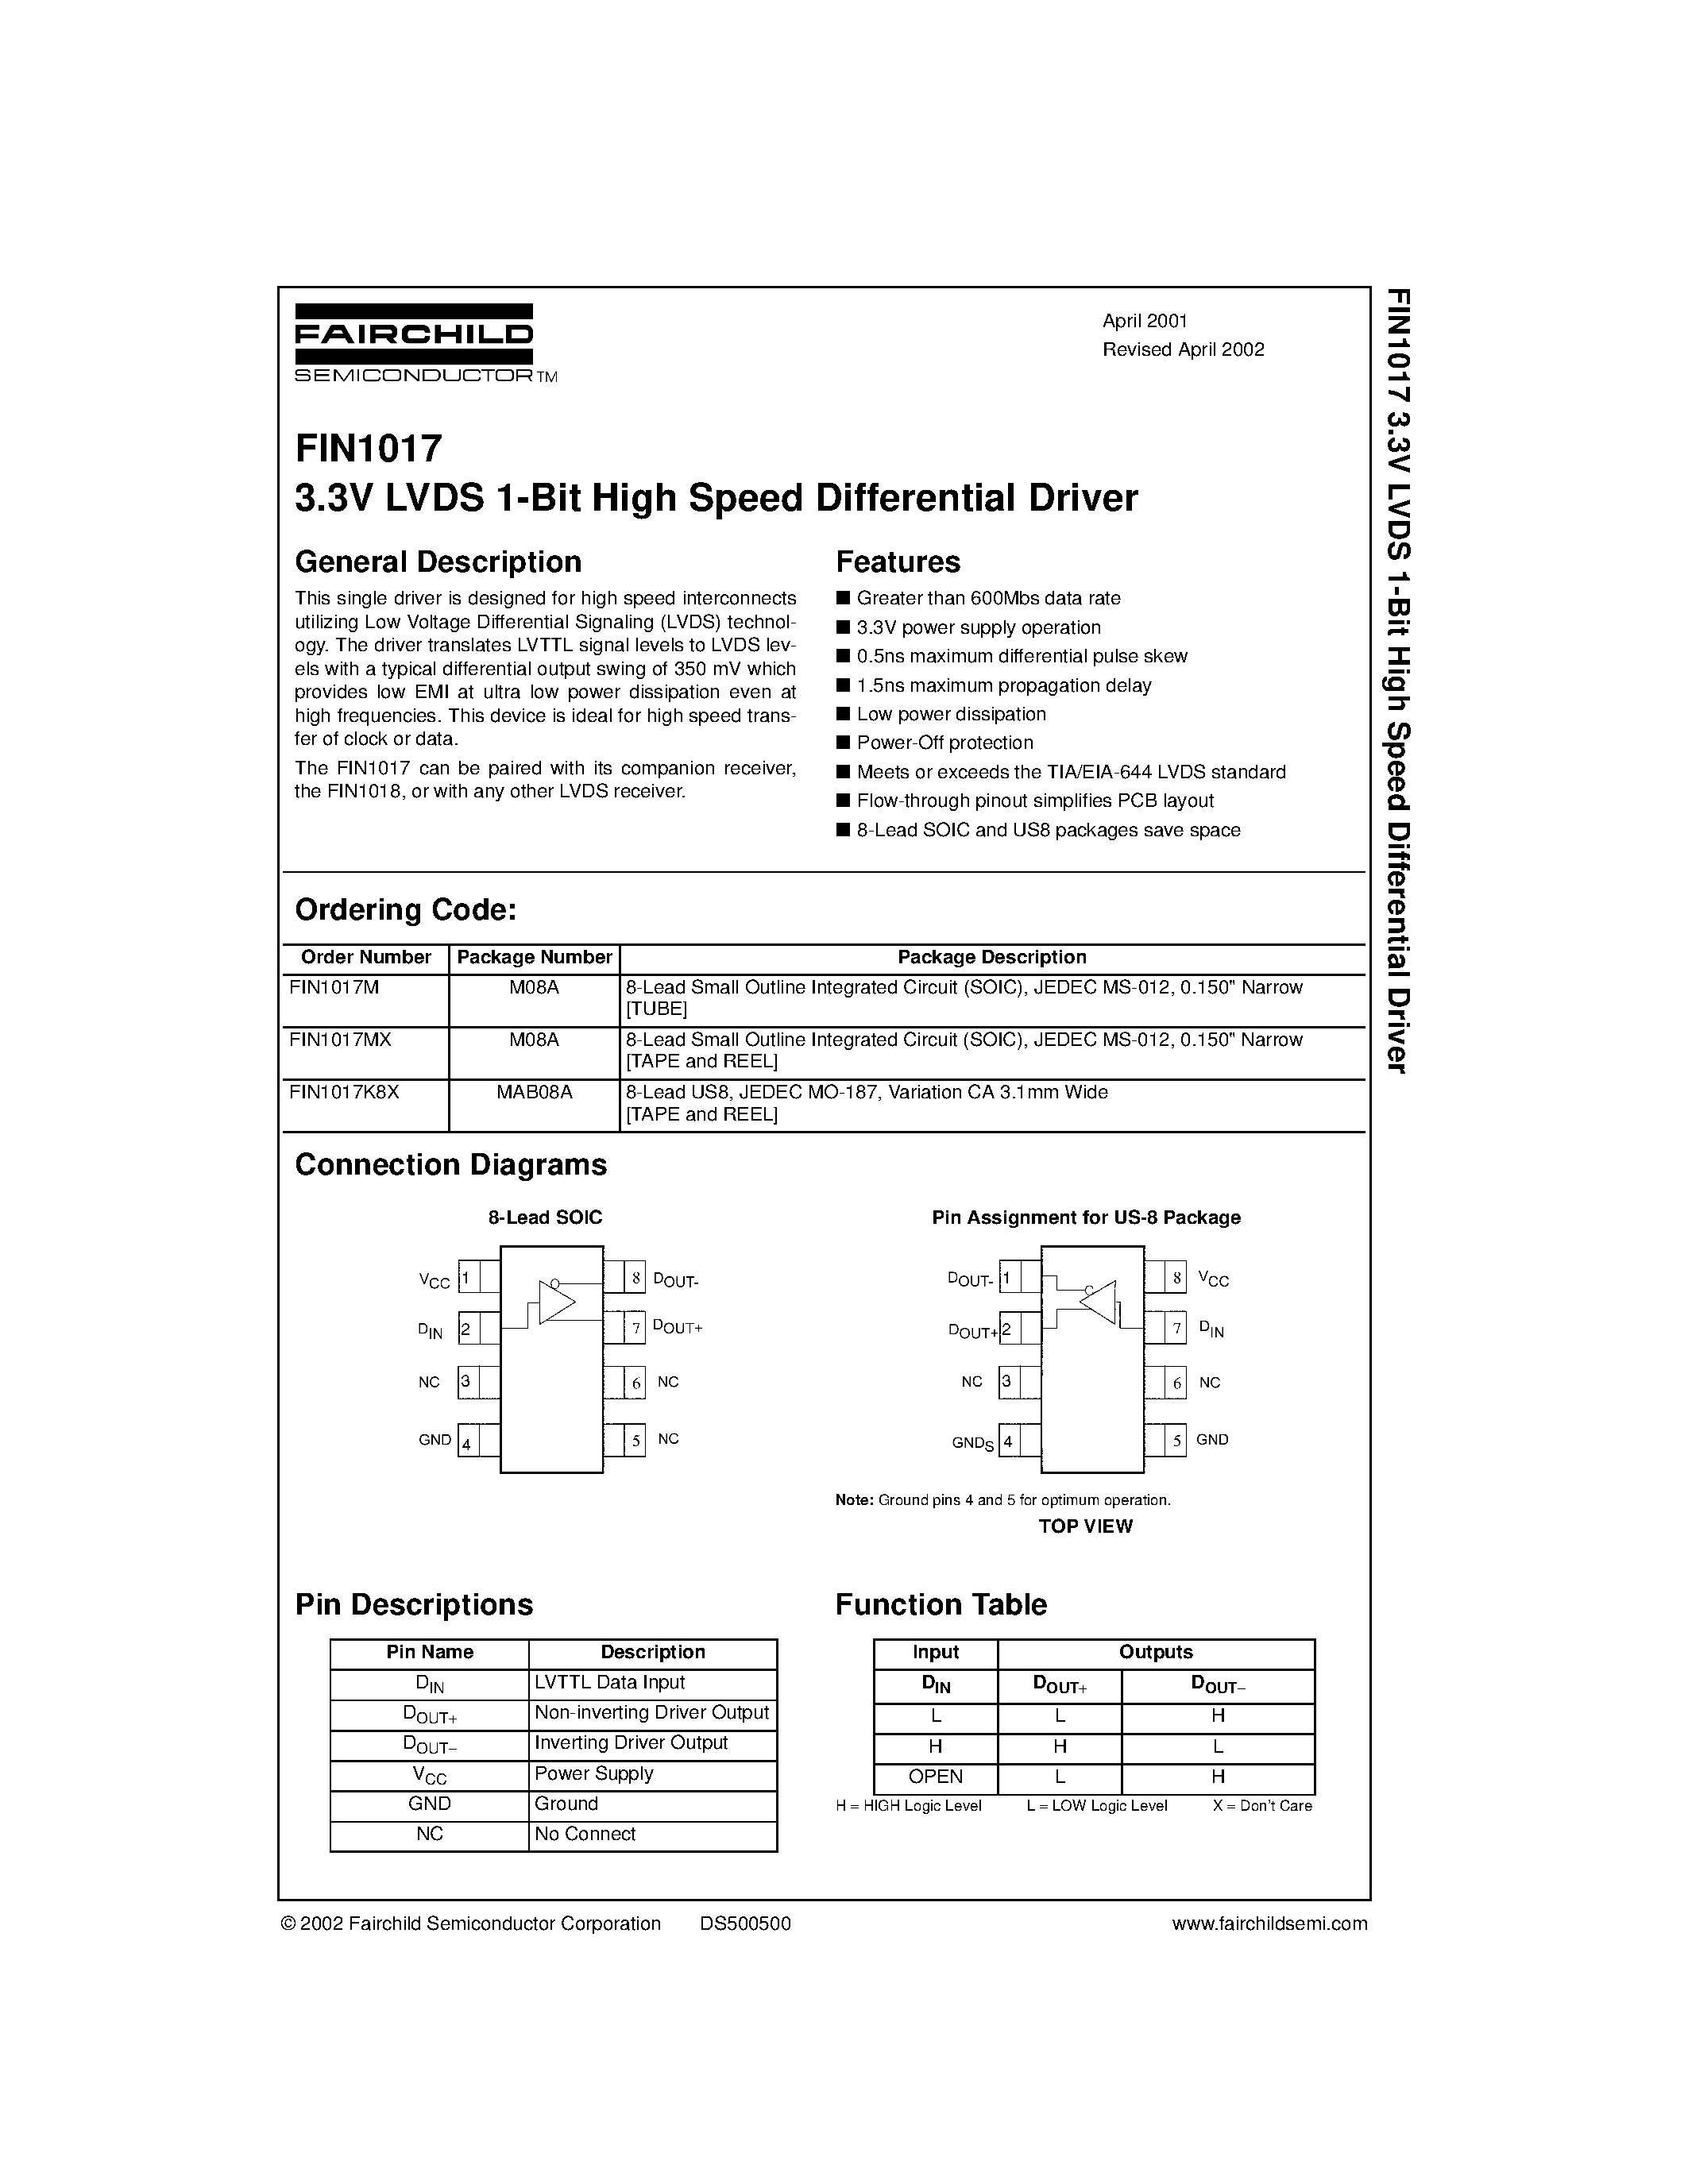 Datasheet FIN1017MX - 3.3V LVDS 1-Bit High Speed Differential Driver page 1